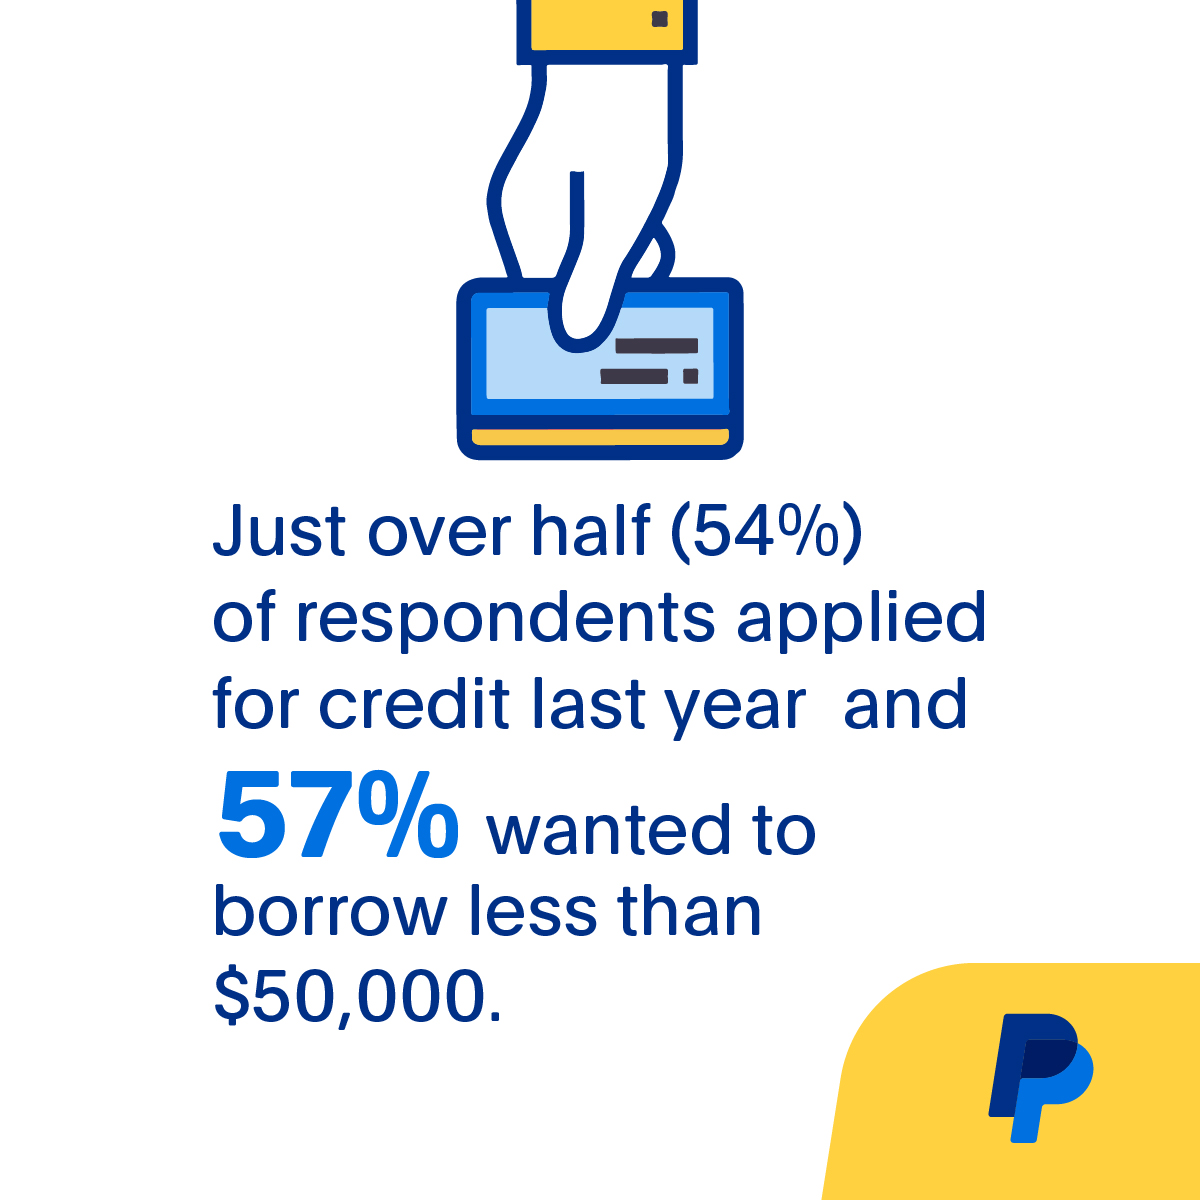 Graphic: Just over half of respondents applied for credit last year and 57% wanted to borrow less than $50,000.